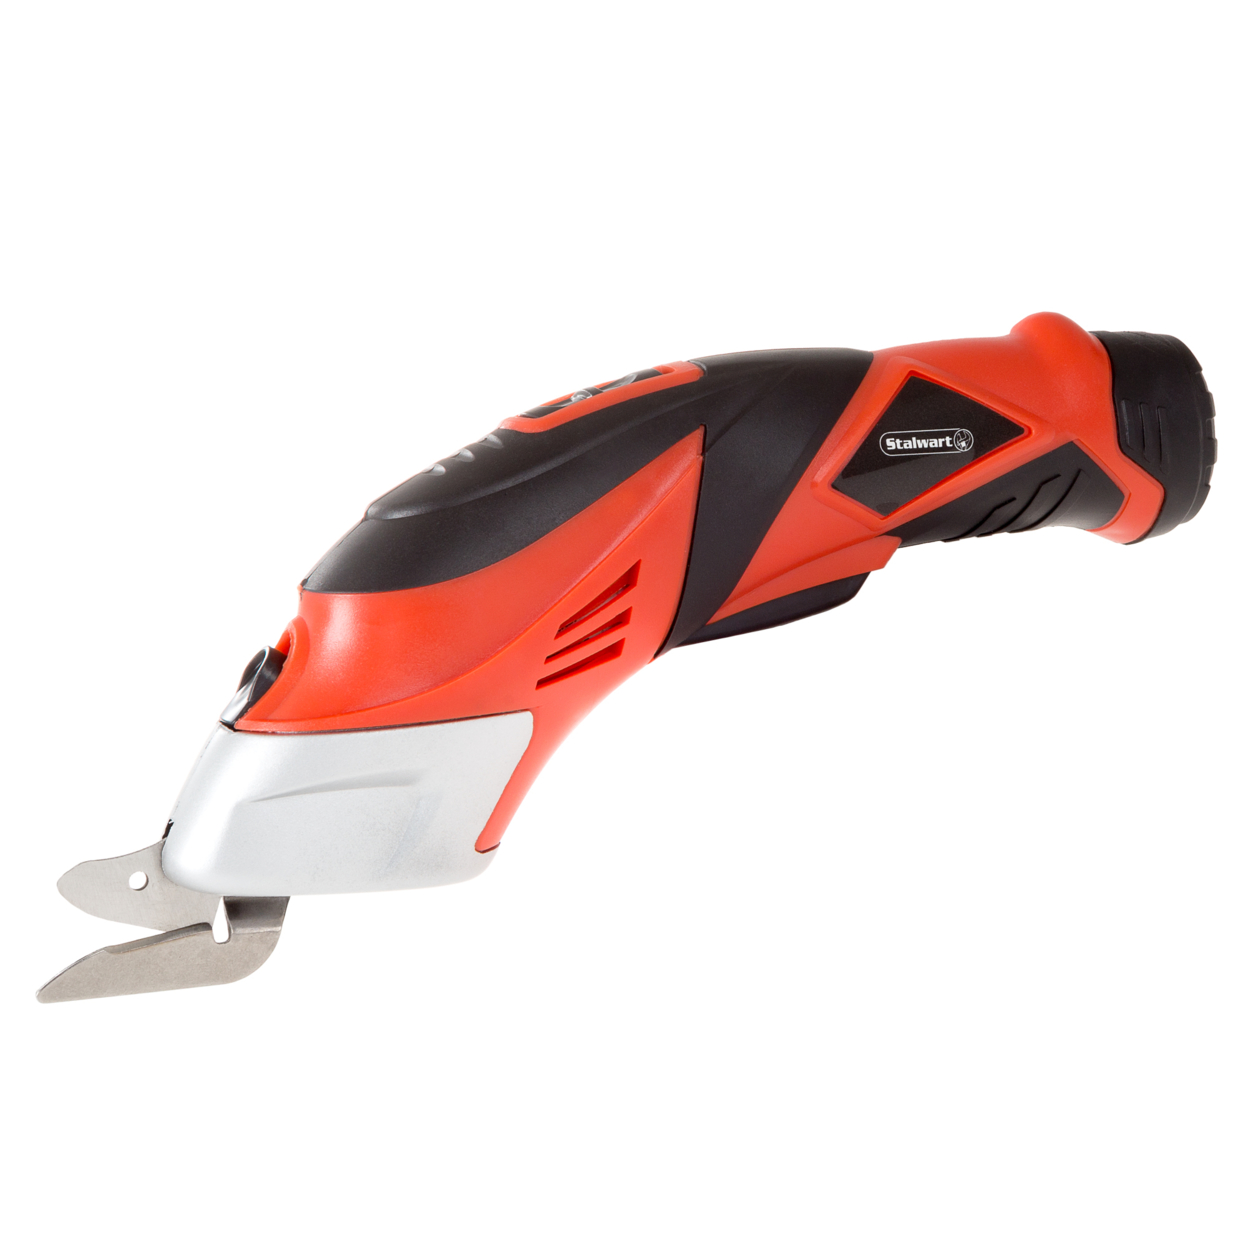 Cordless Power Scissors With Two Blades - Fabric, Leather, Carpet And Cardboard Cutter- 3.6V NiCad Lithium Ion Rechargeable Battery